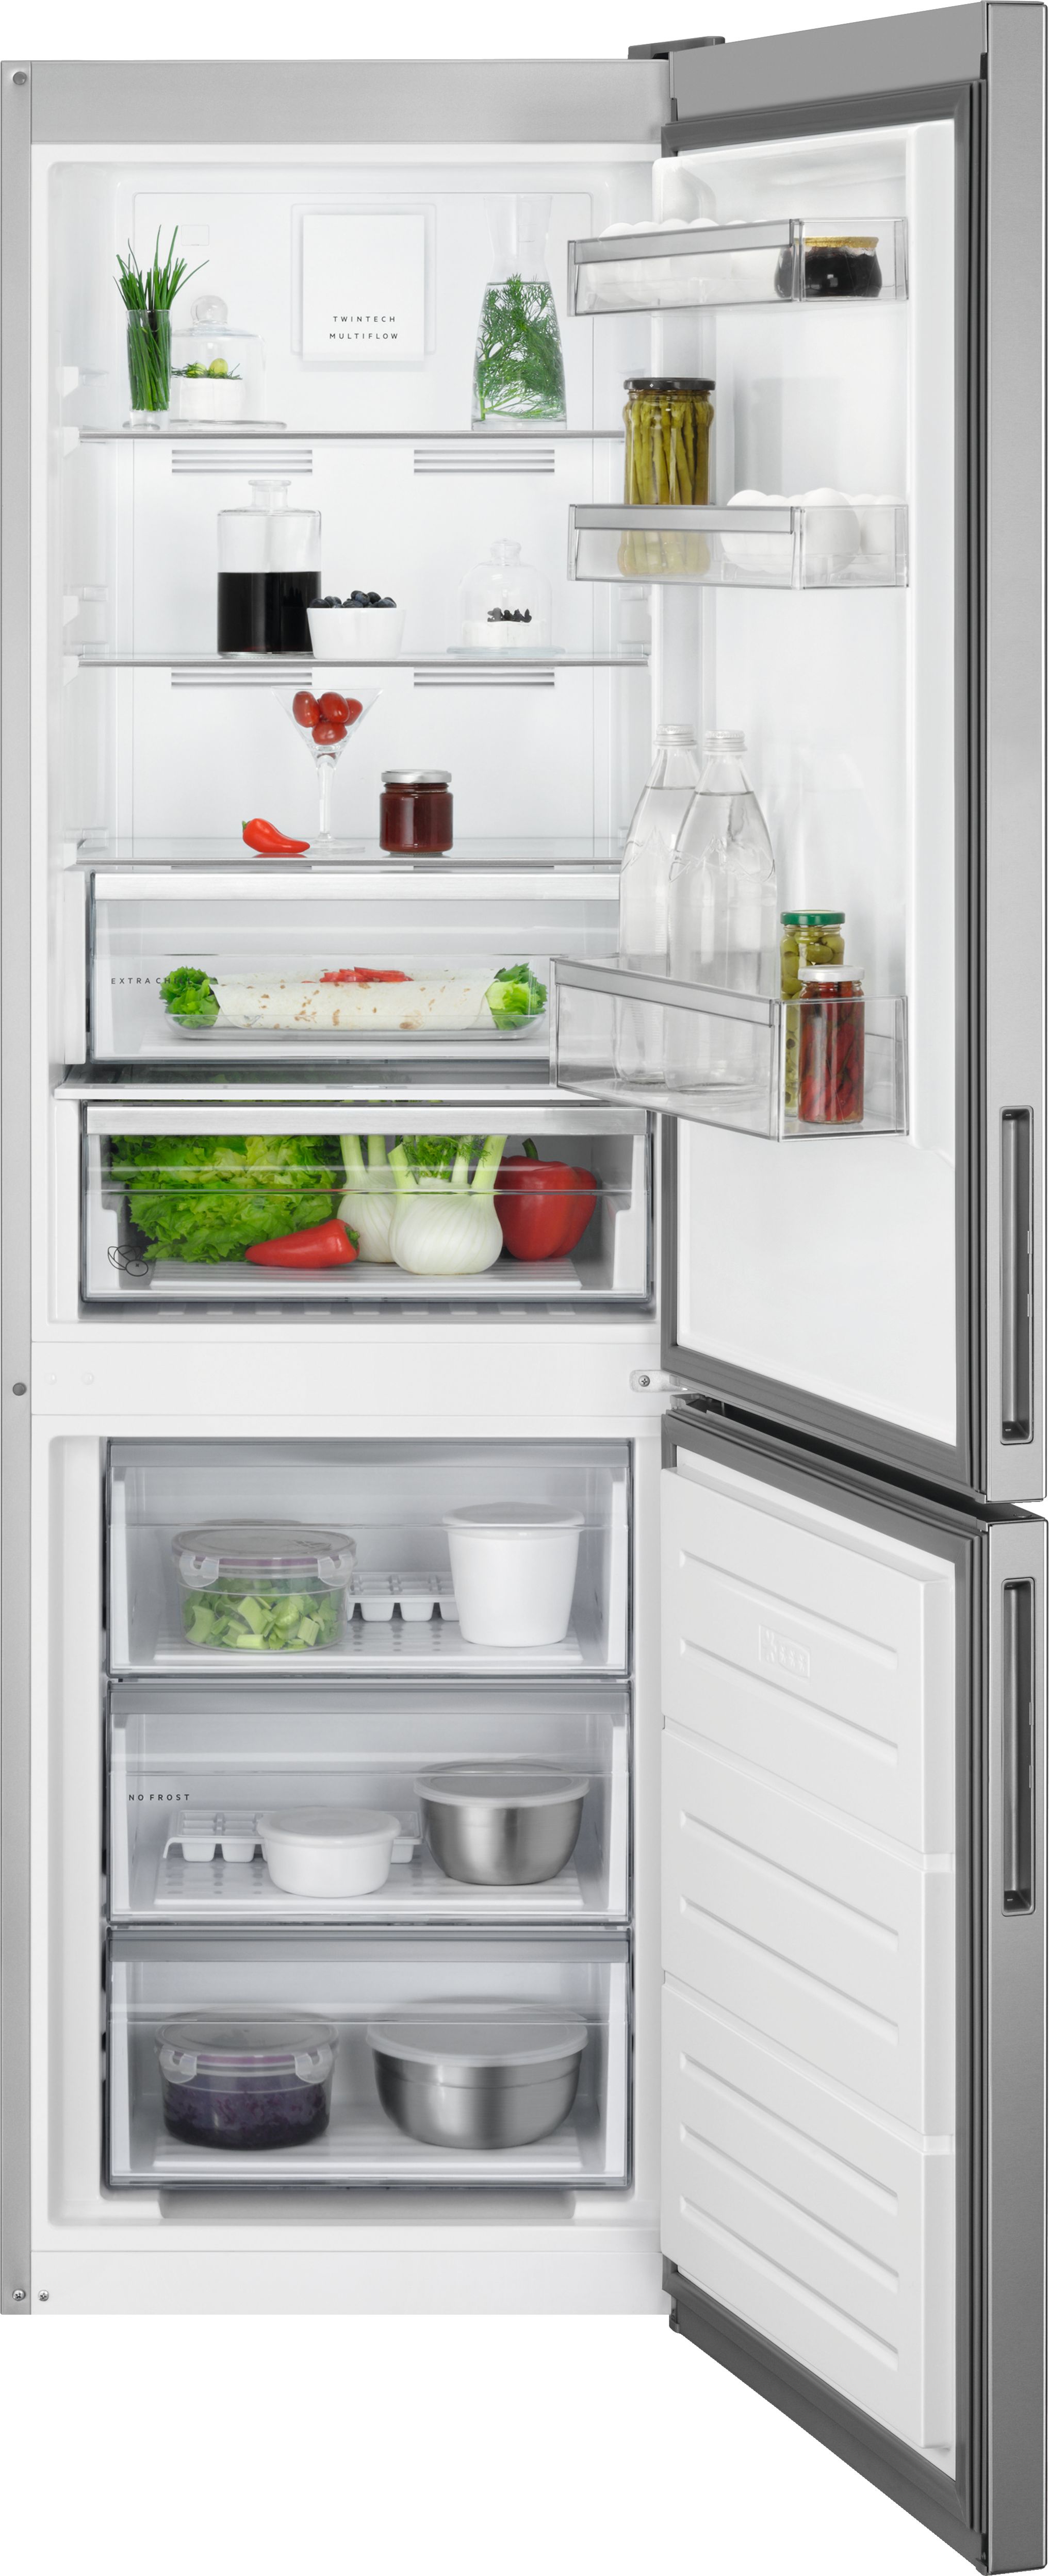 AEG 6000 TwinTech RCB632E2MX 70/30 No Frost Fridge Freezer - Stainless Steel - E Rated, Stainless Steel